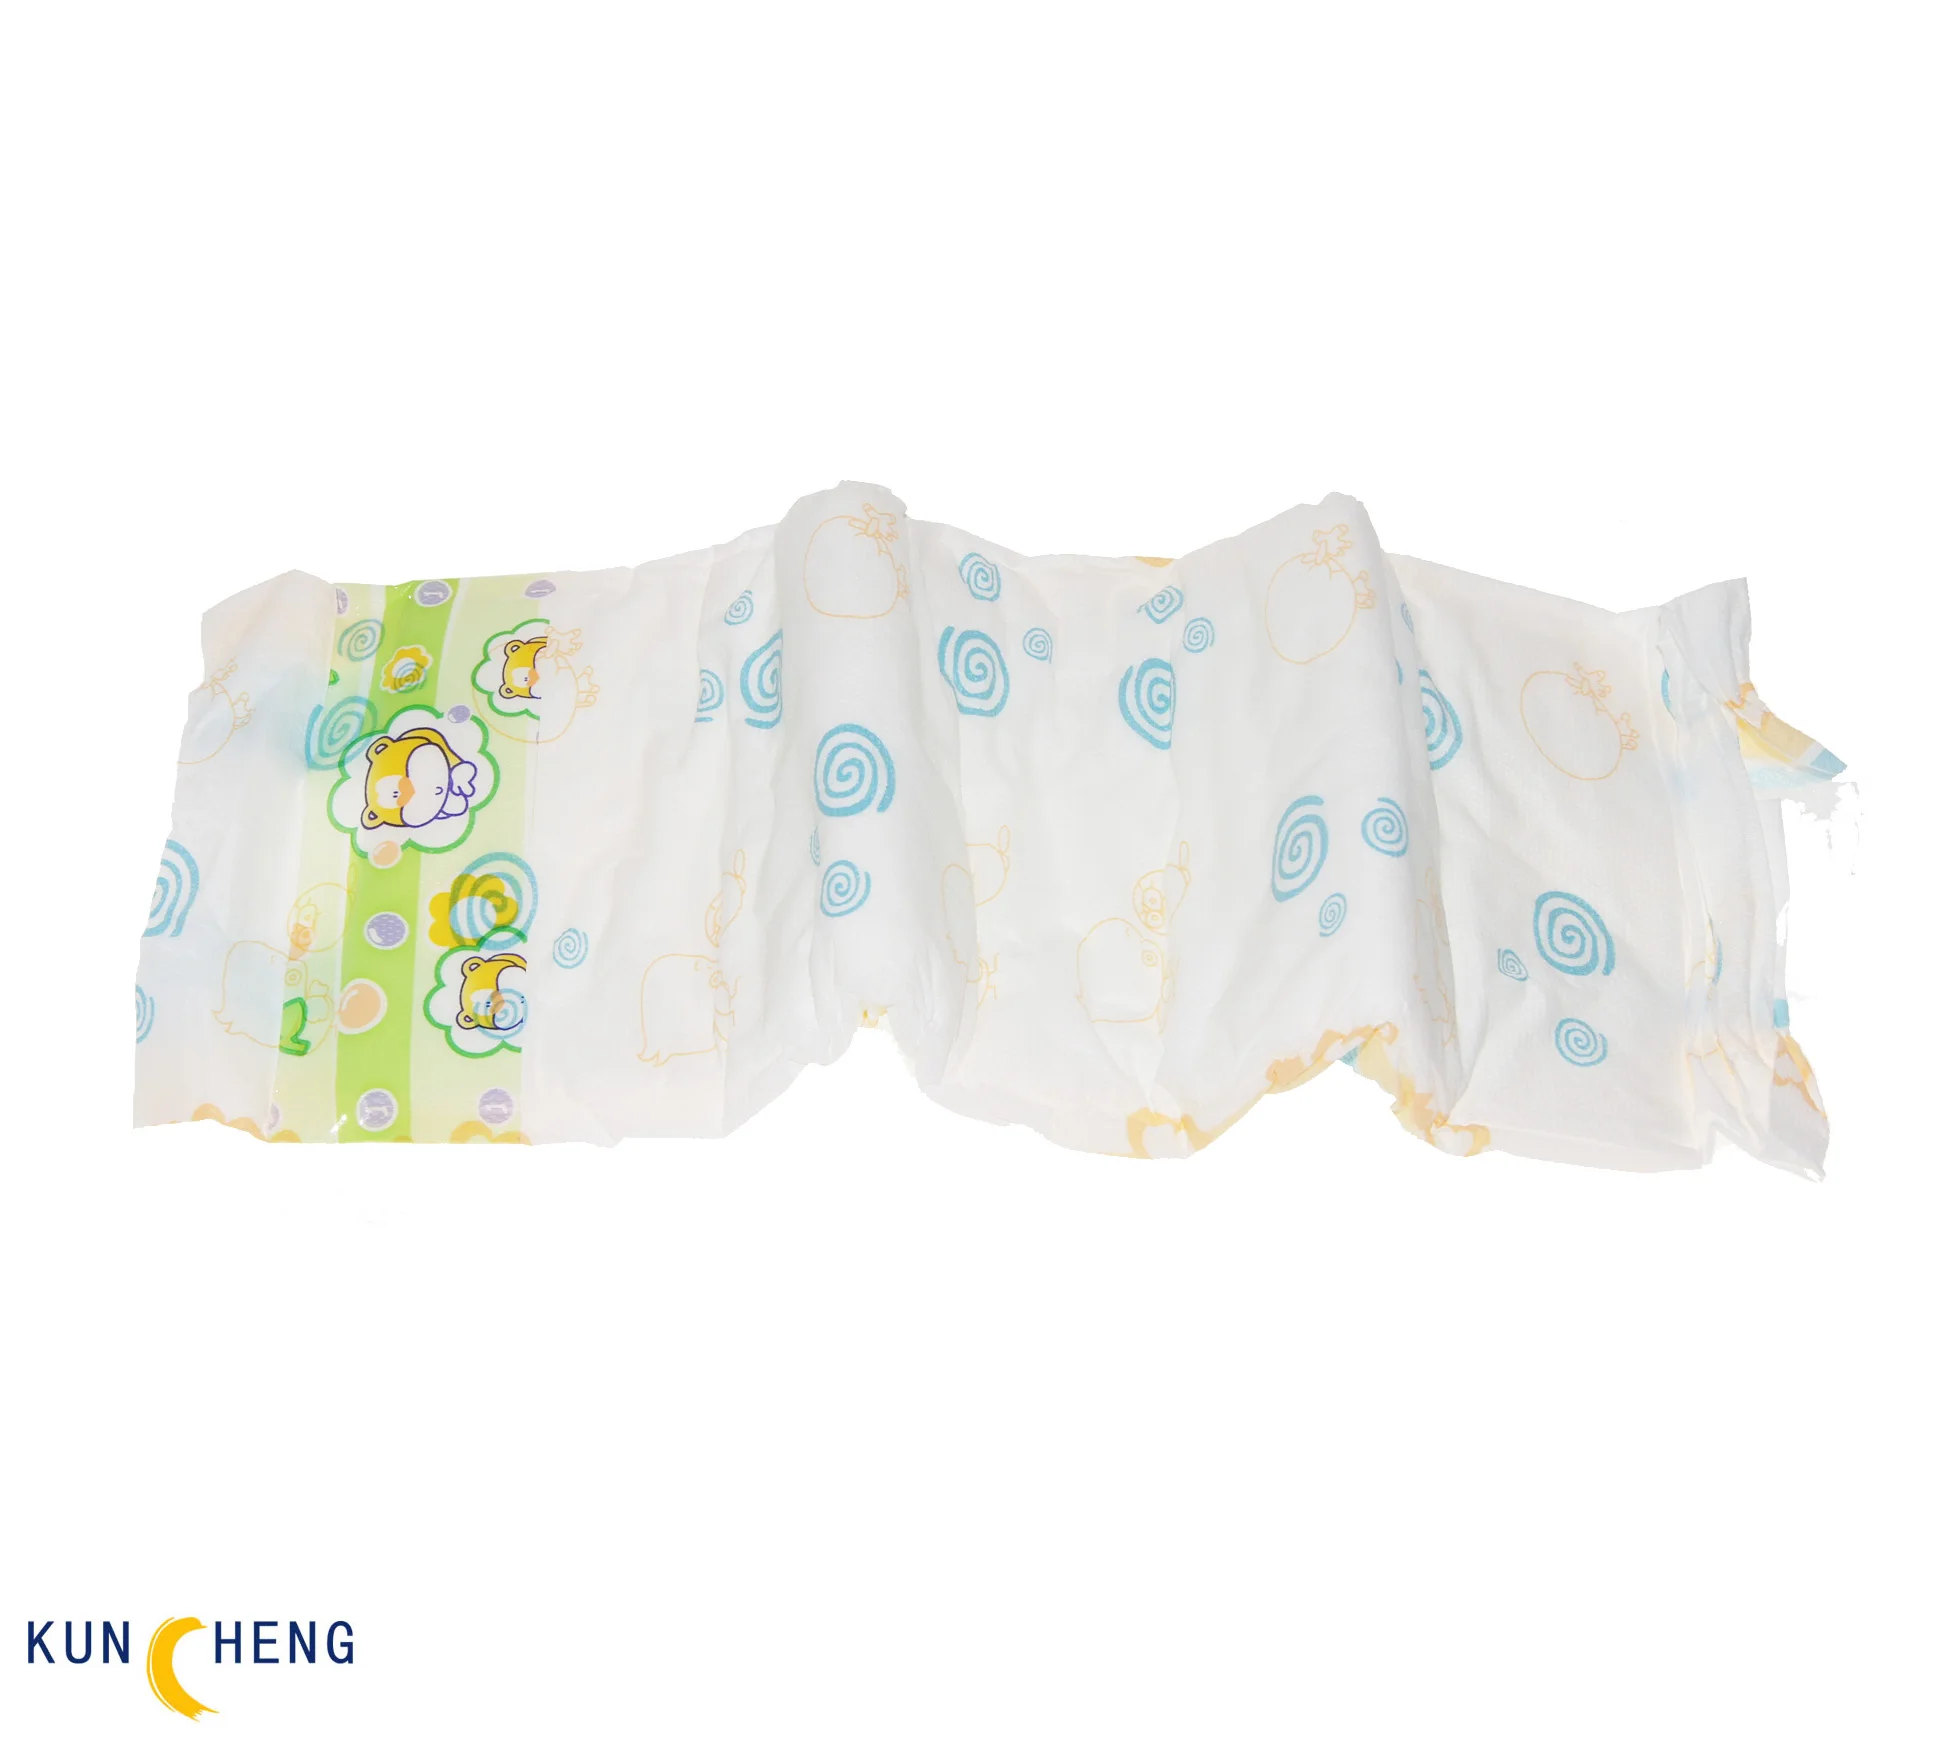 
baby diapers super thin soft touch adult diaper non woven breathable disposable high absorbability no leakage size m 25g/5g 